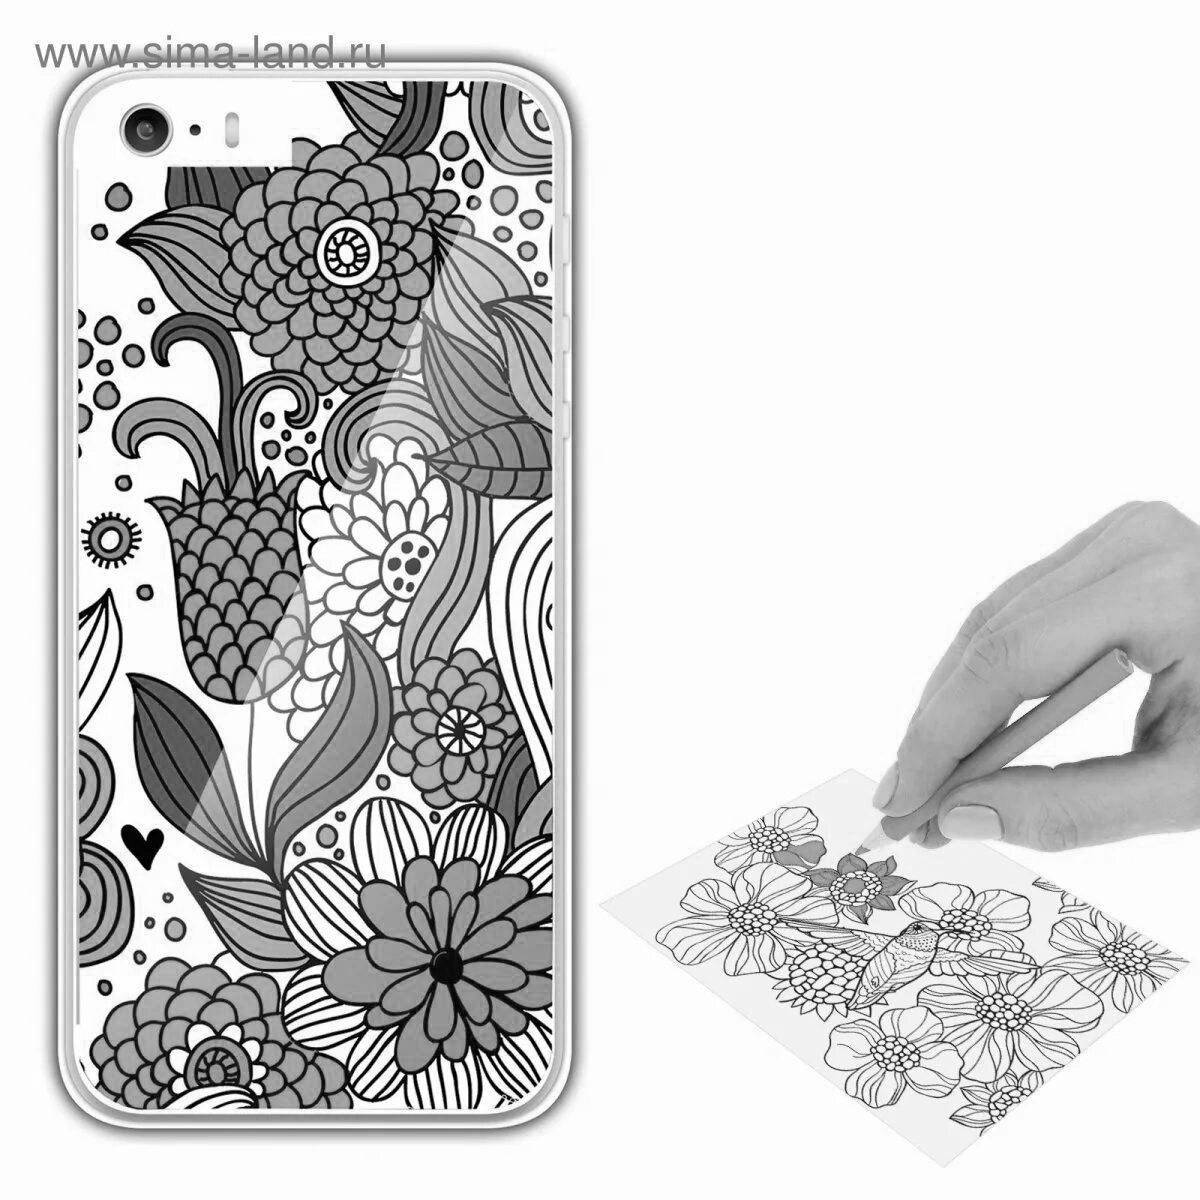 Color design of phone case coloring book